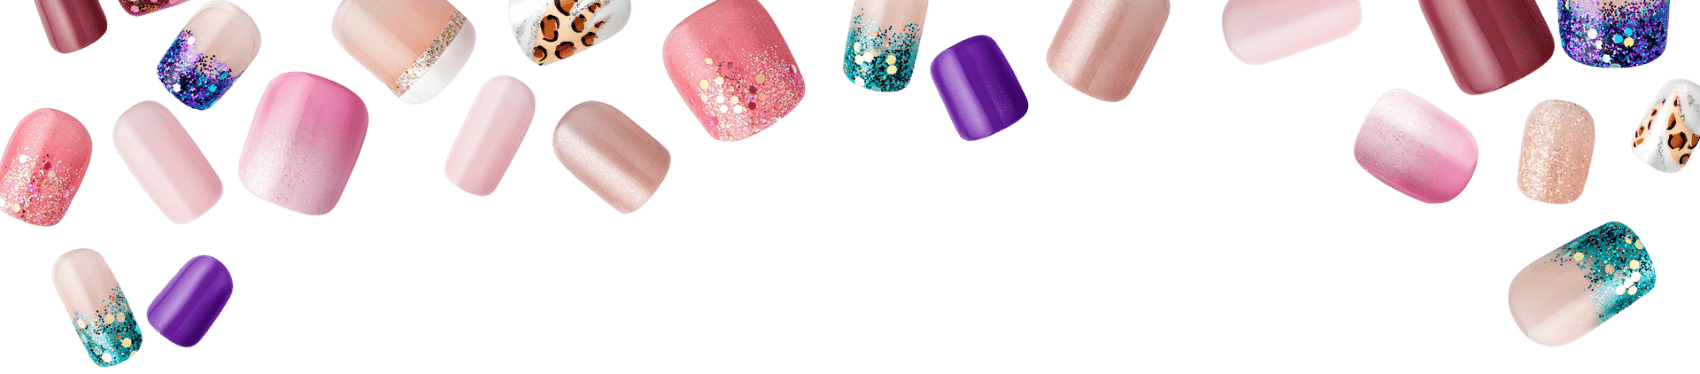 Acrylic Nails PNG Clipart Background